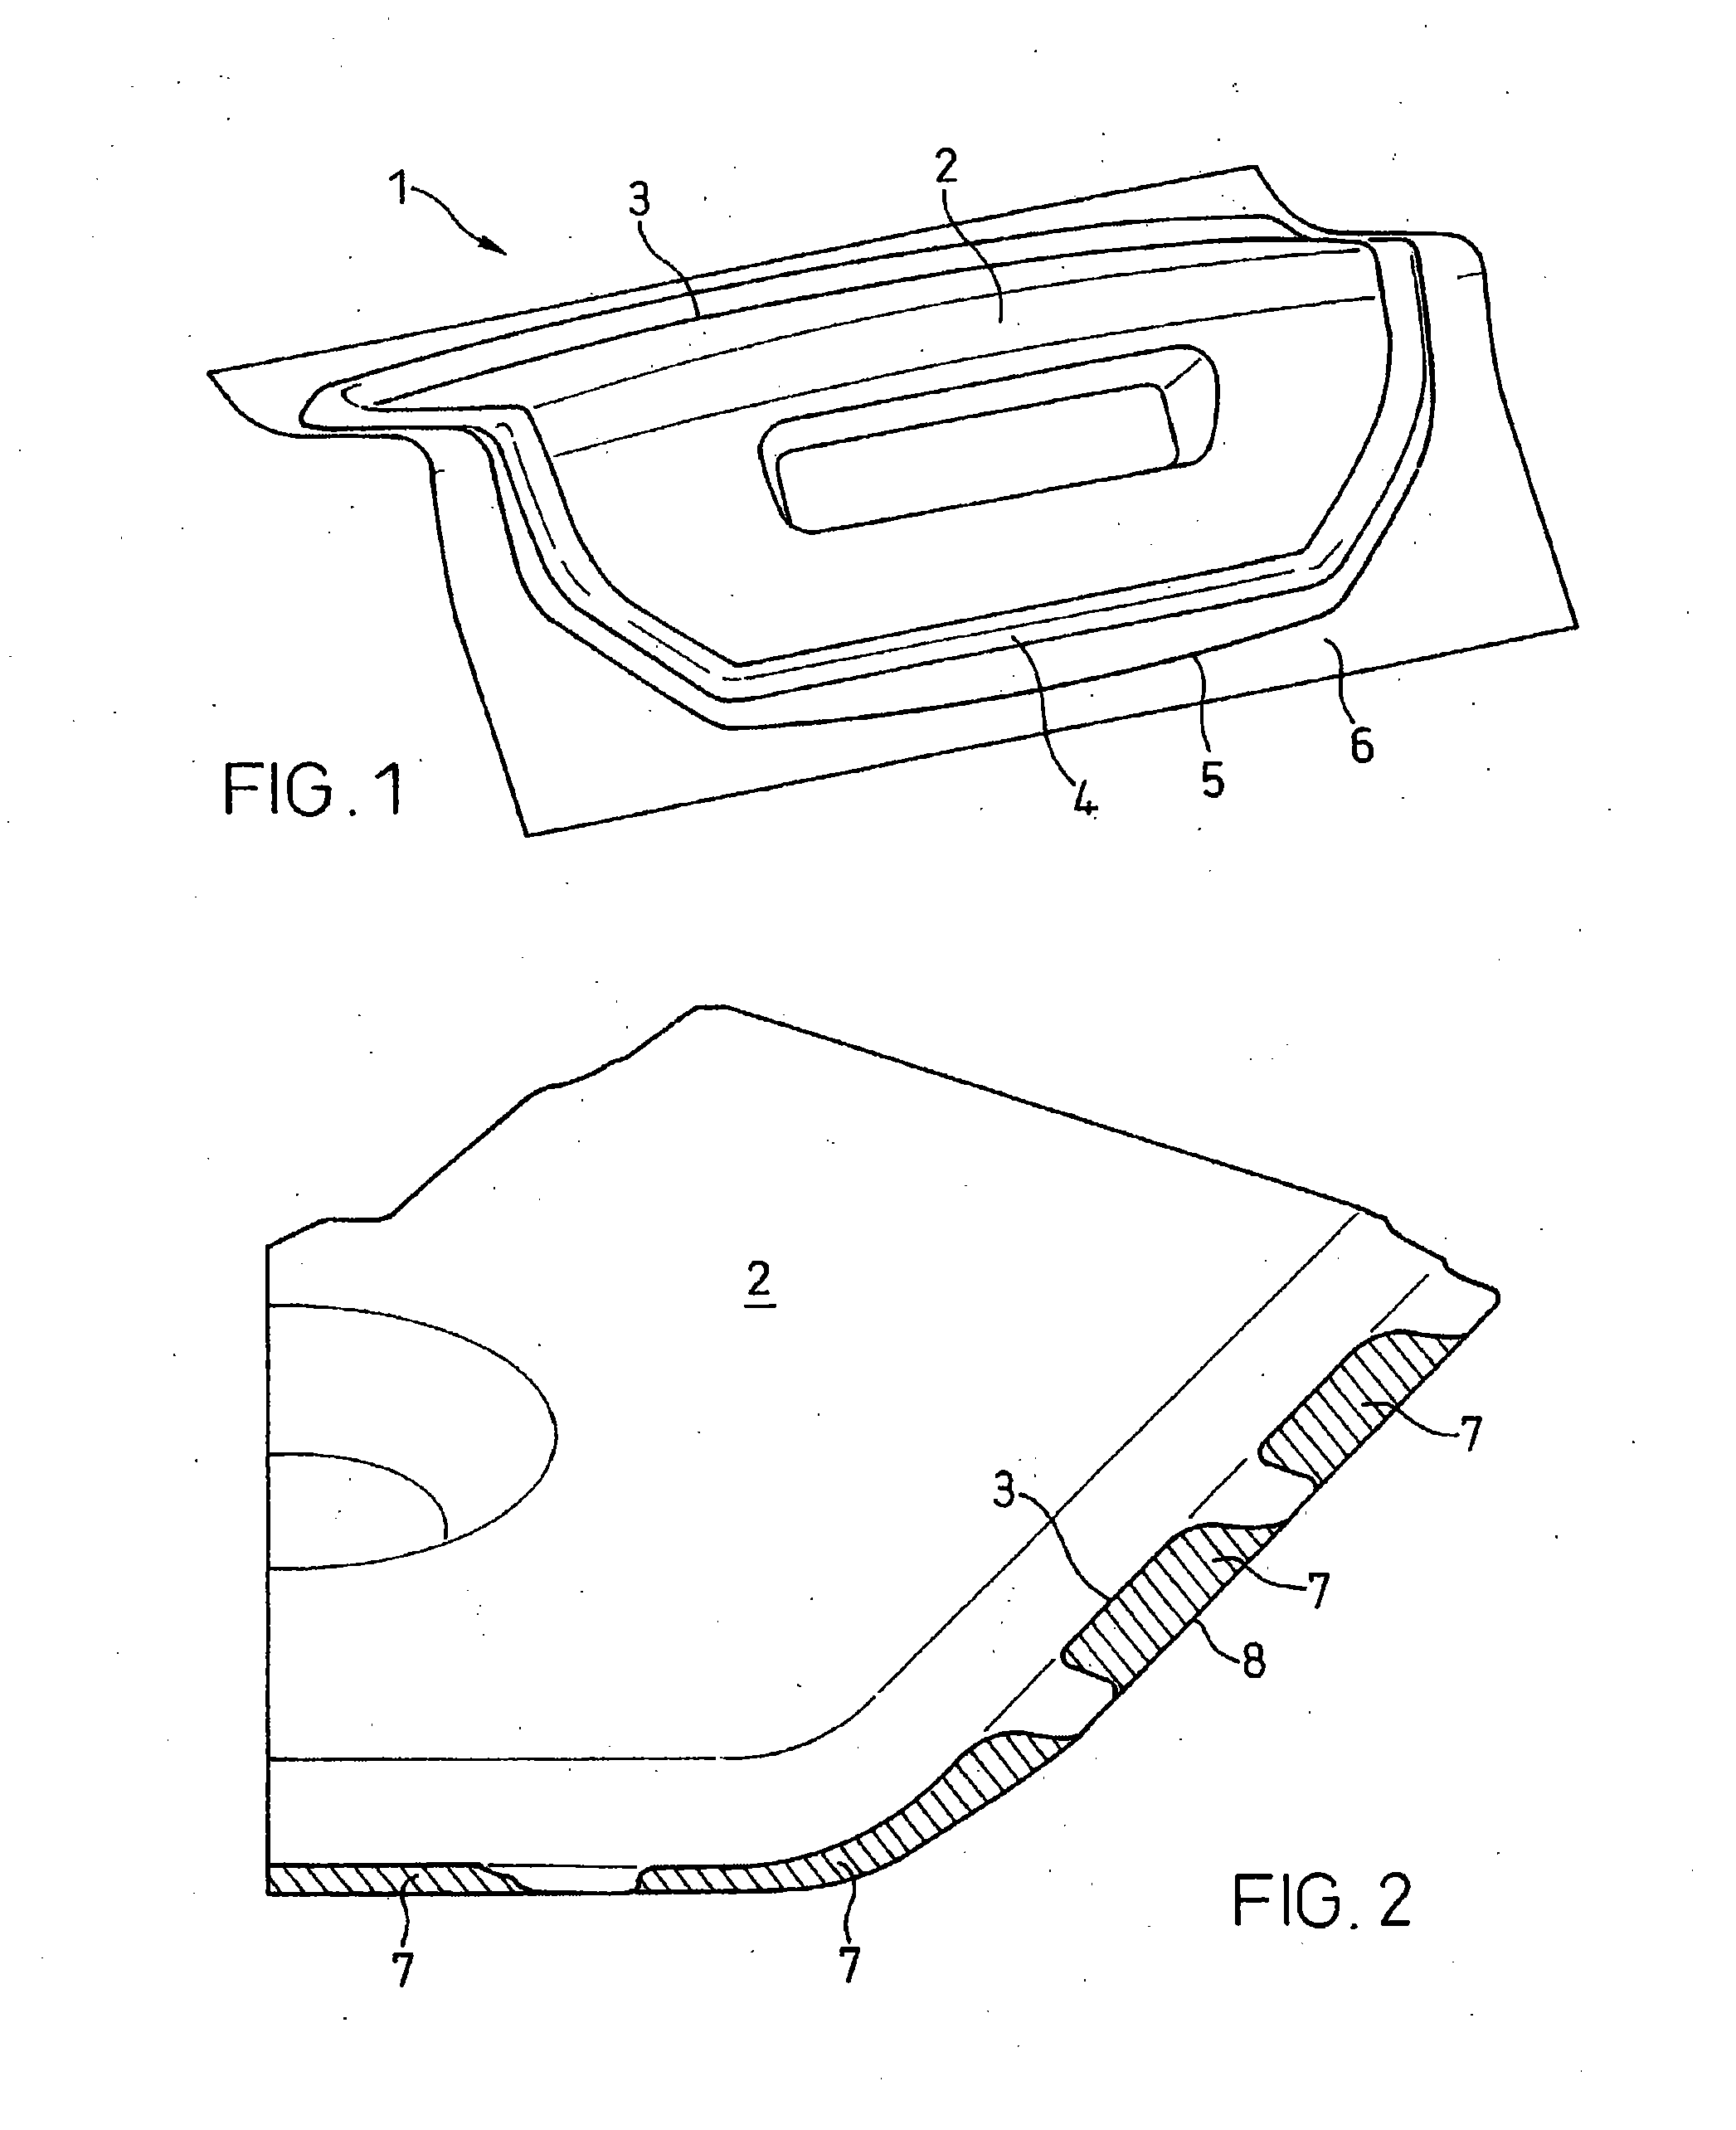 Method for the designing of tools